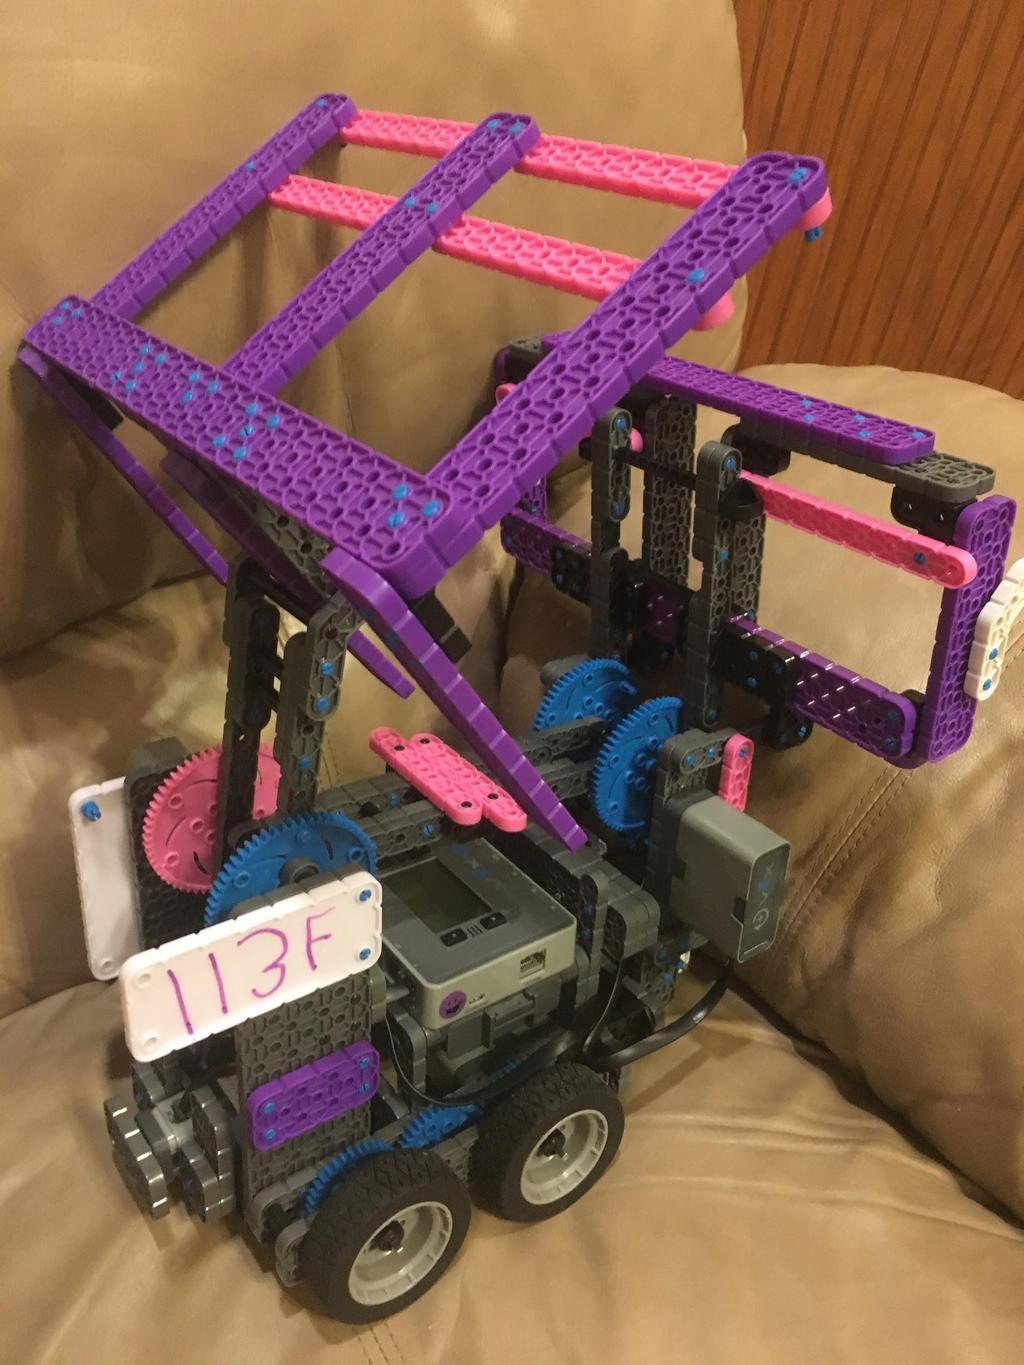 Design 2 We finally decided on our design. We wanted to keep the scoop and basket idea. We thought it needed a little bit of color. We ordered pink and purple VEX parts.